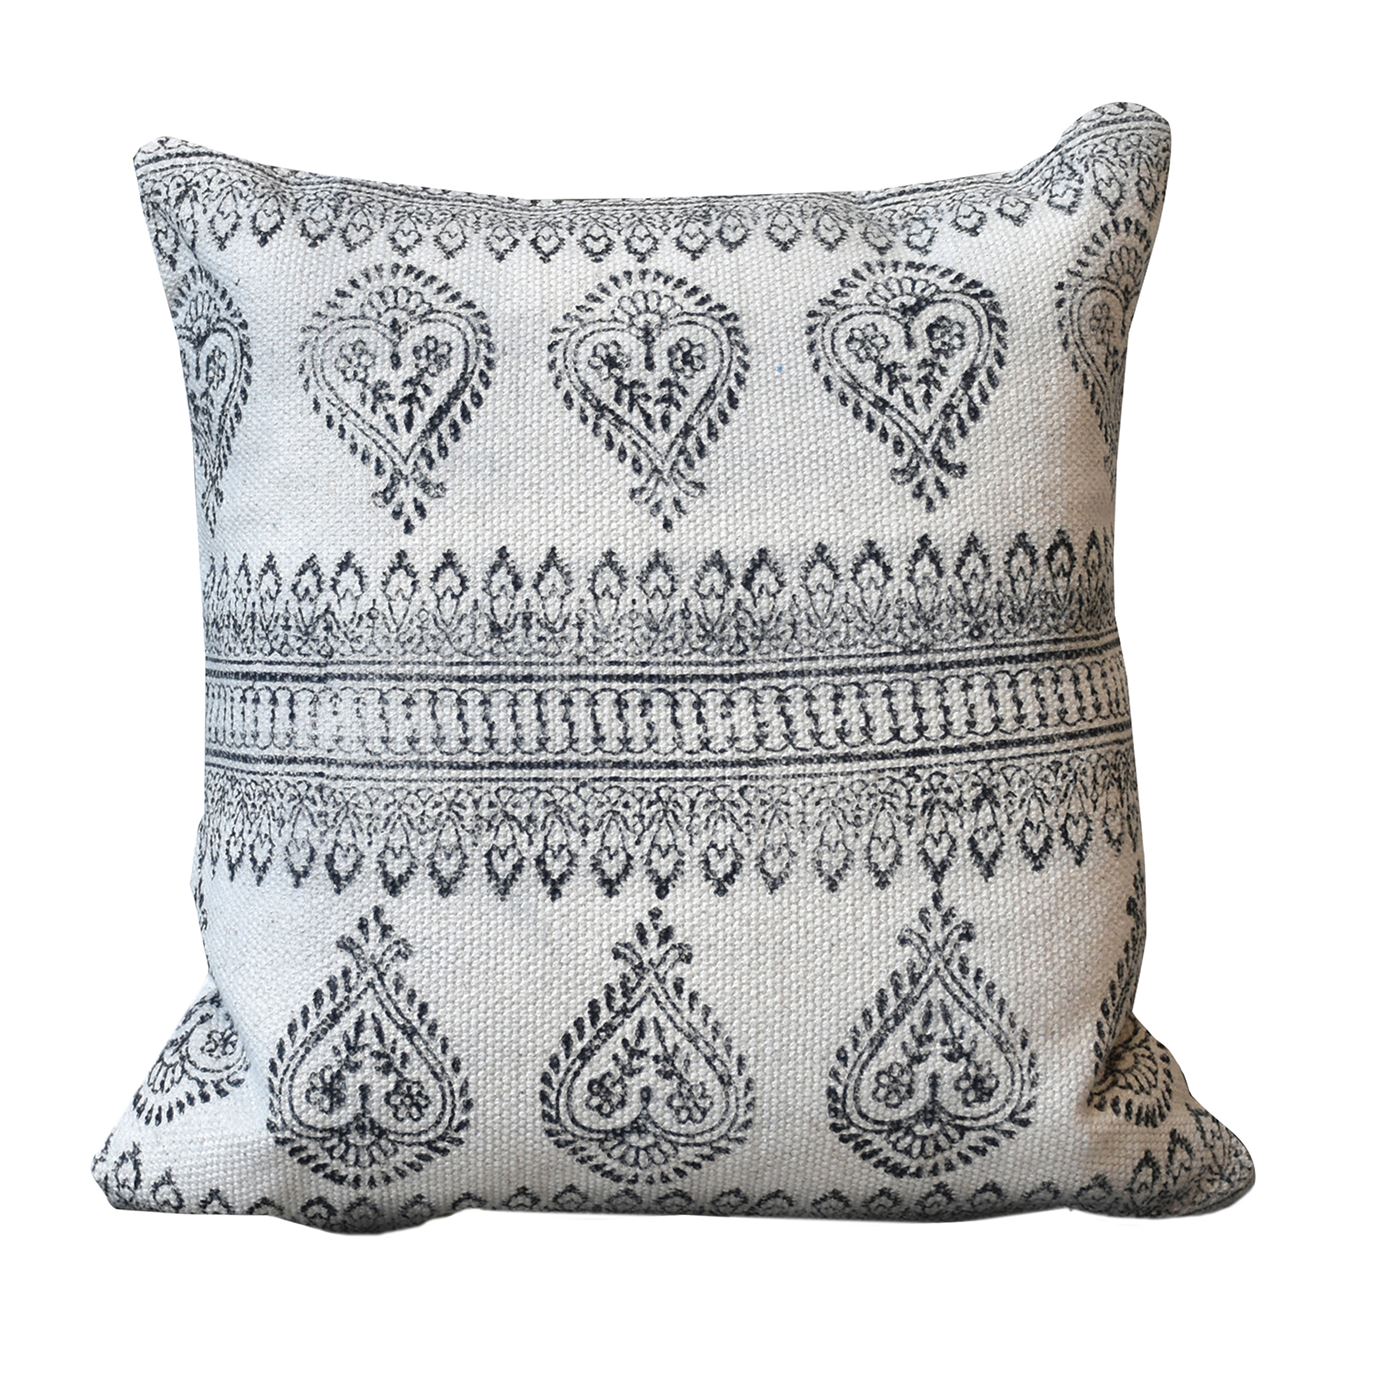 Dunlin Pillow, Cotton, Printed, Natural White, Charcoal, Hand Woven, Flat Weave